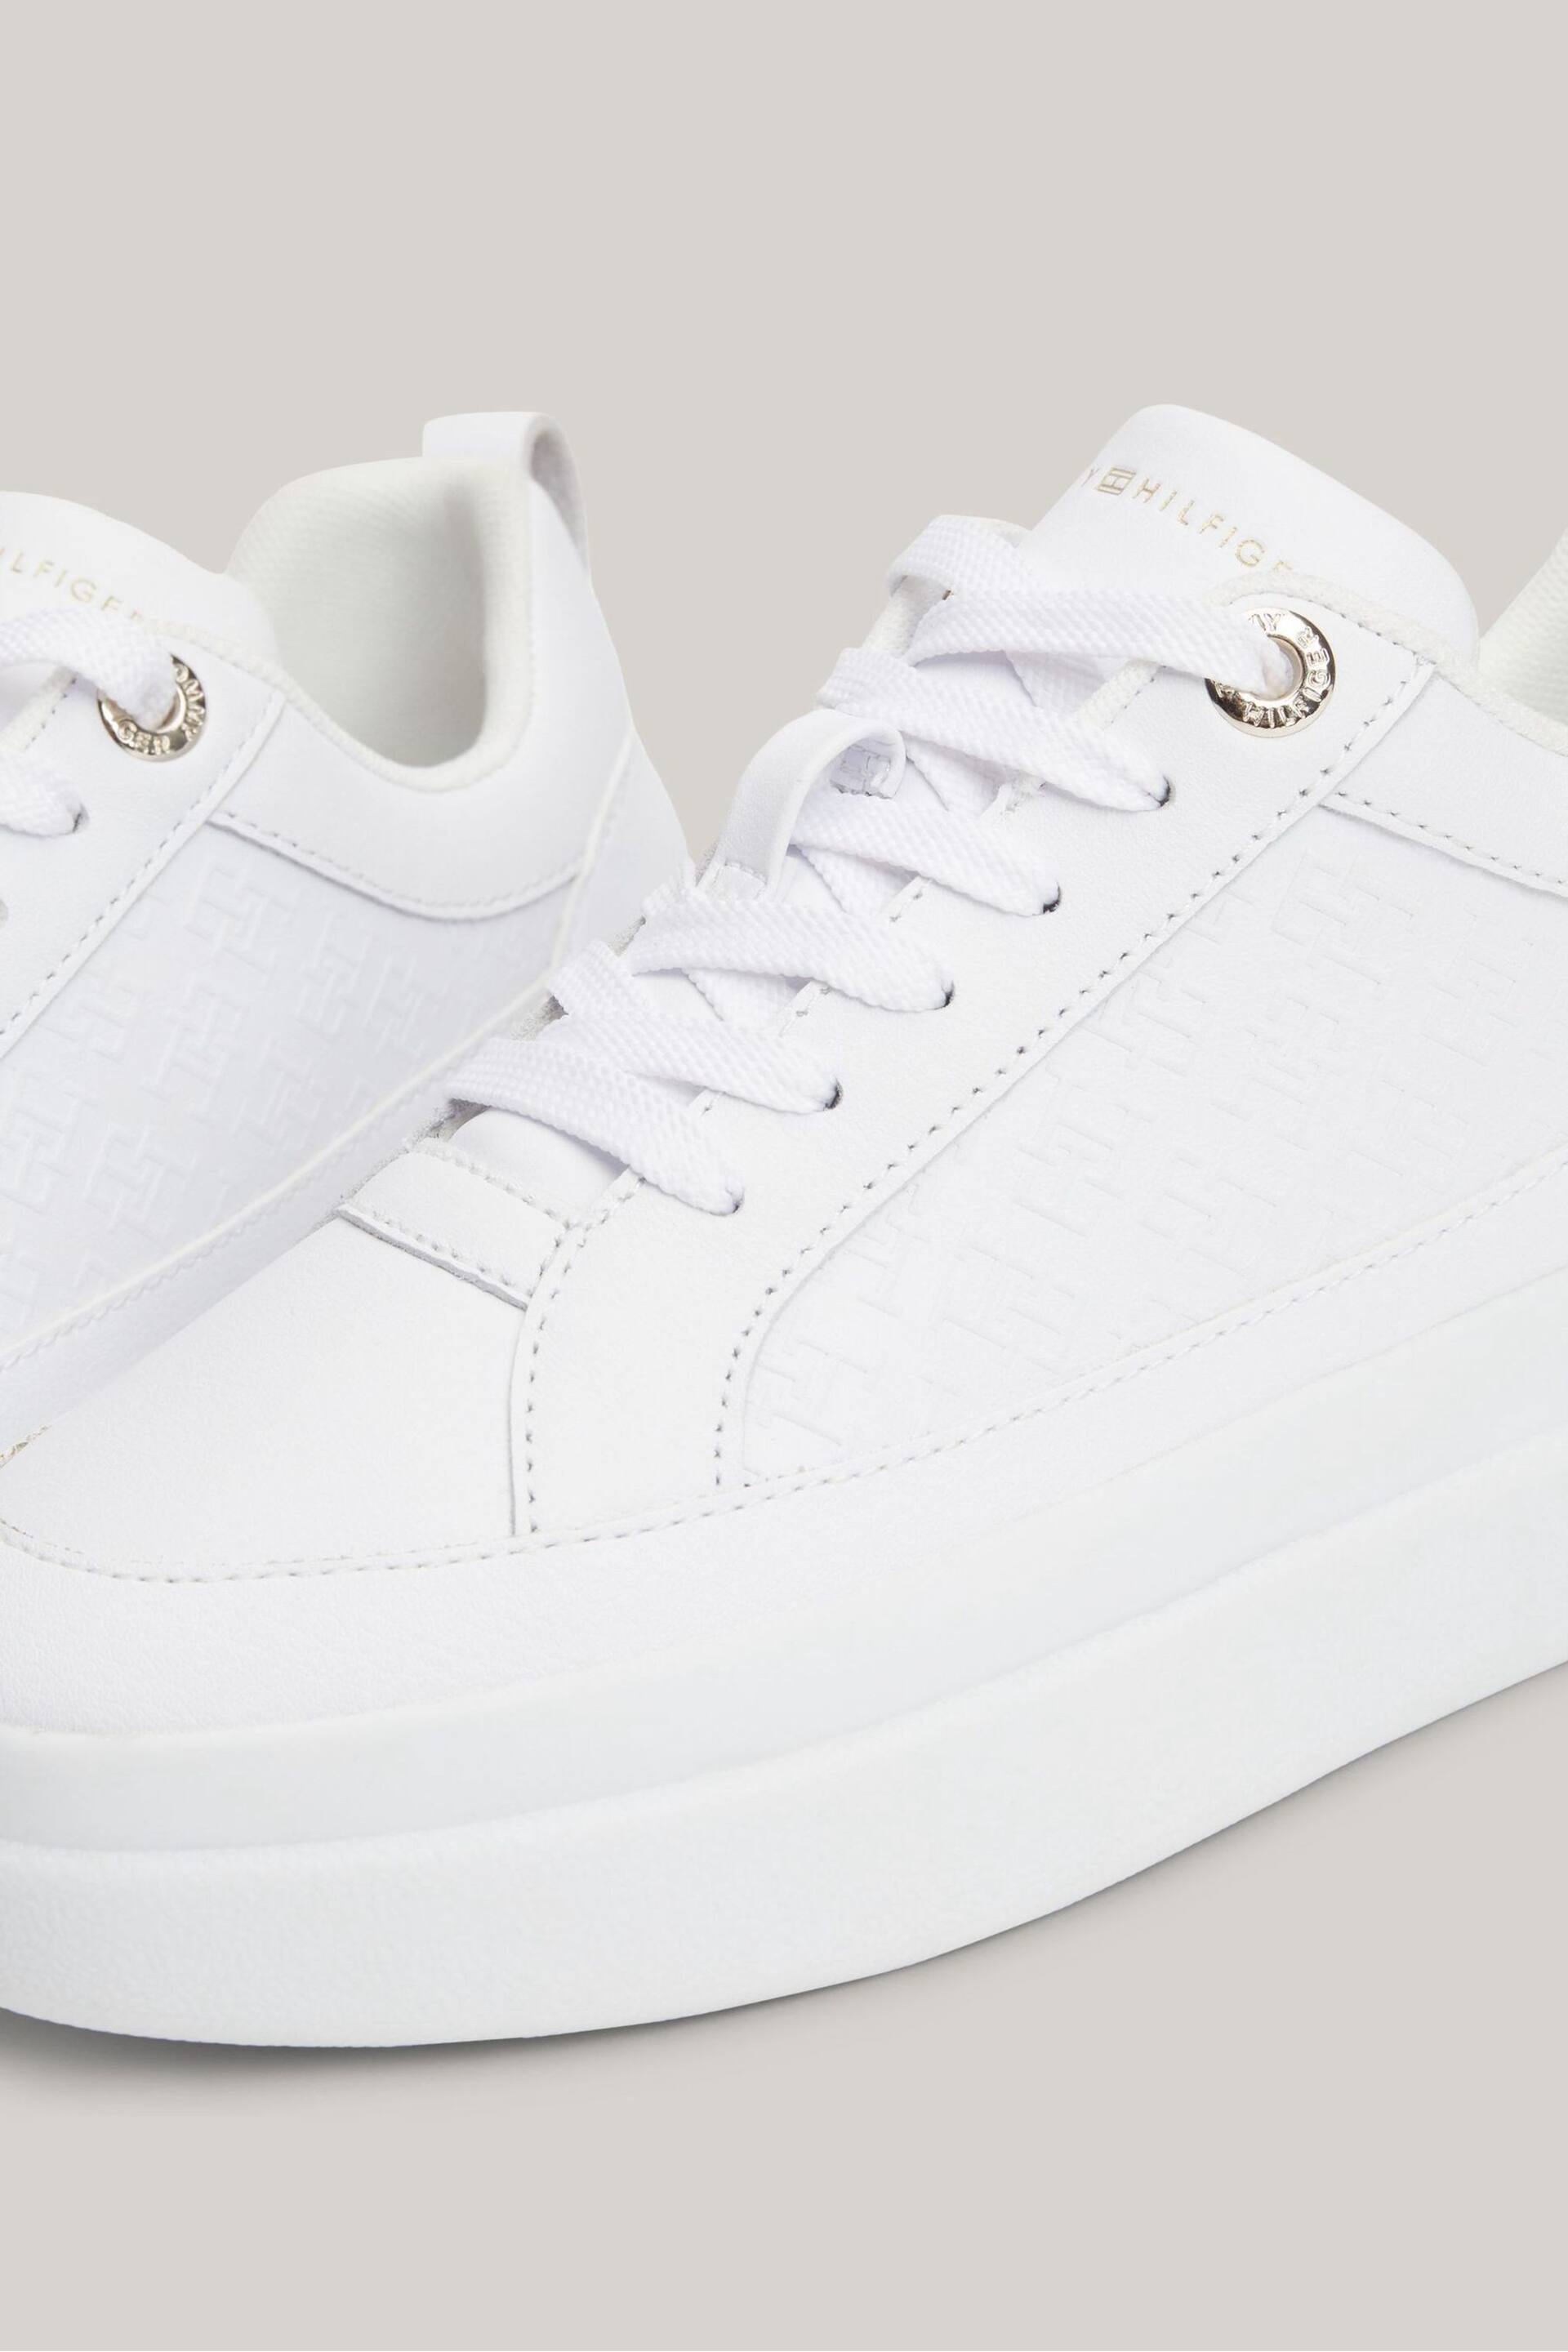 Tommy Hilfiger Lux Court White Sneakers - Image 5 of 5